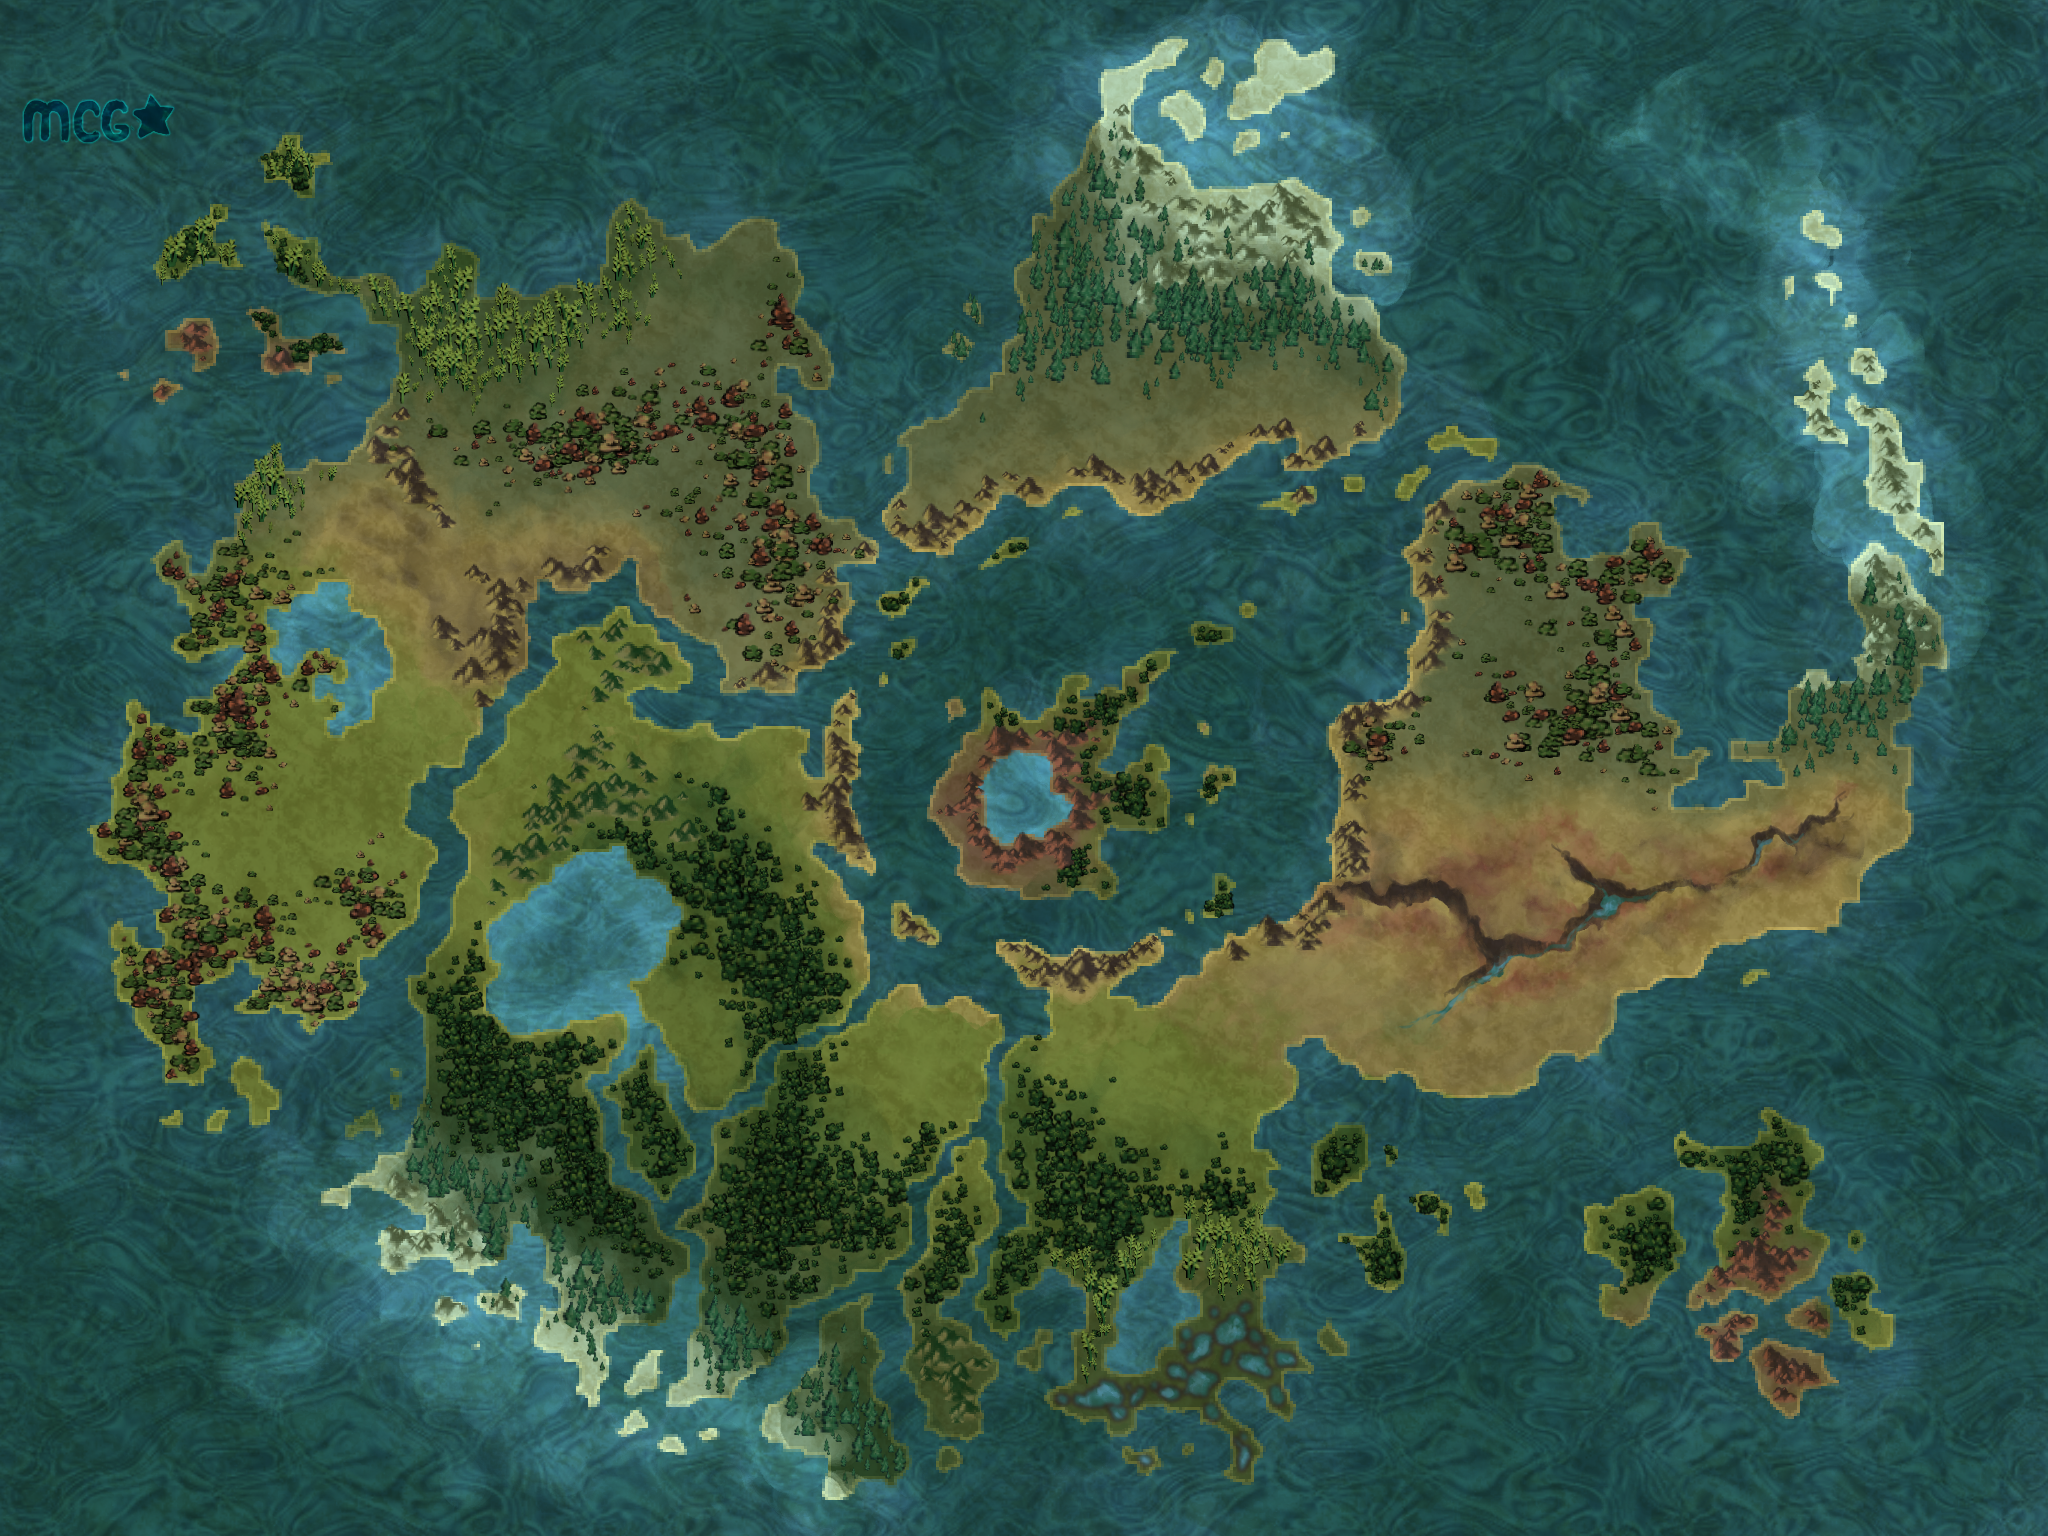 rioren_map__no_markers__by_monochromegoggles-dbzy4jr.png